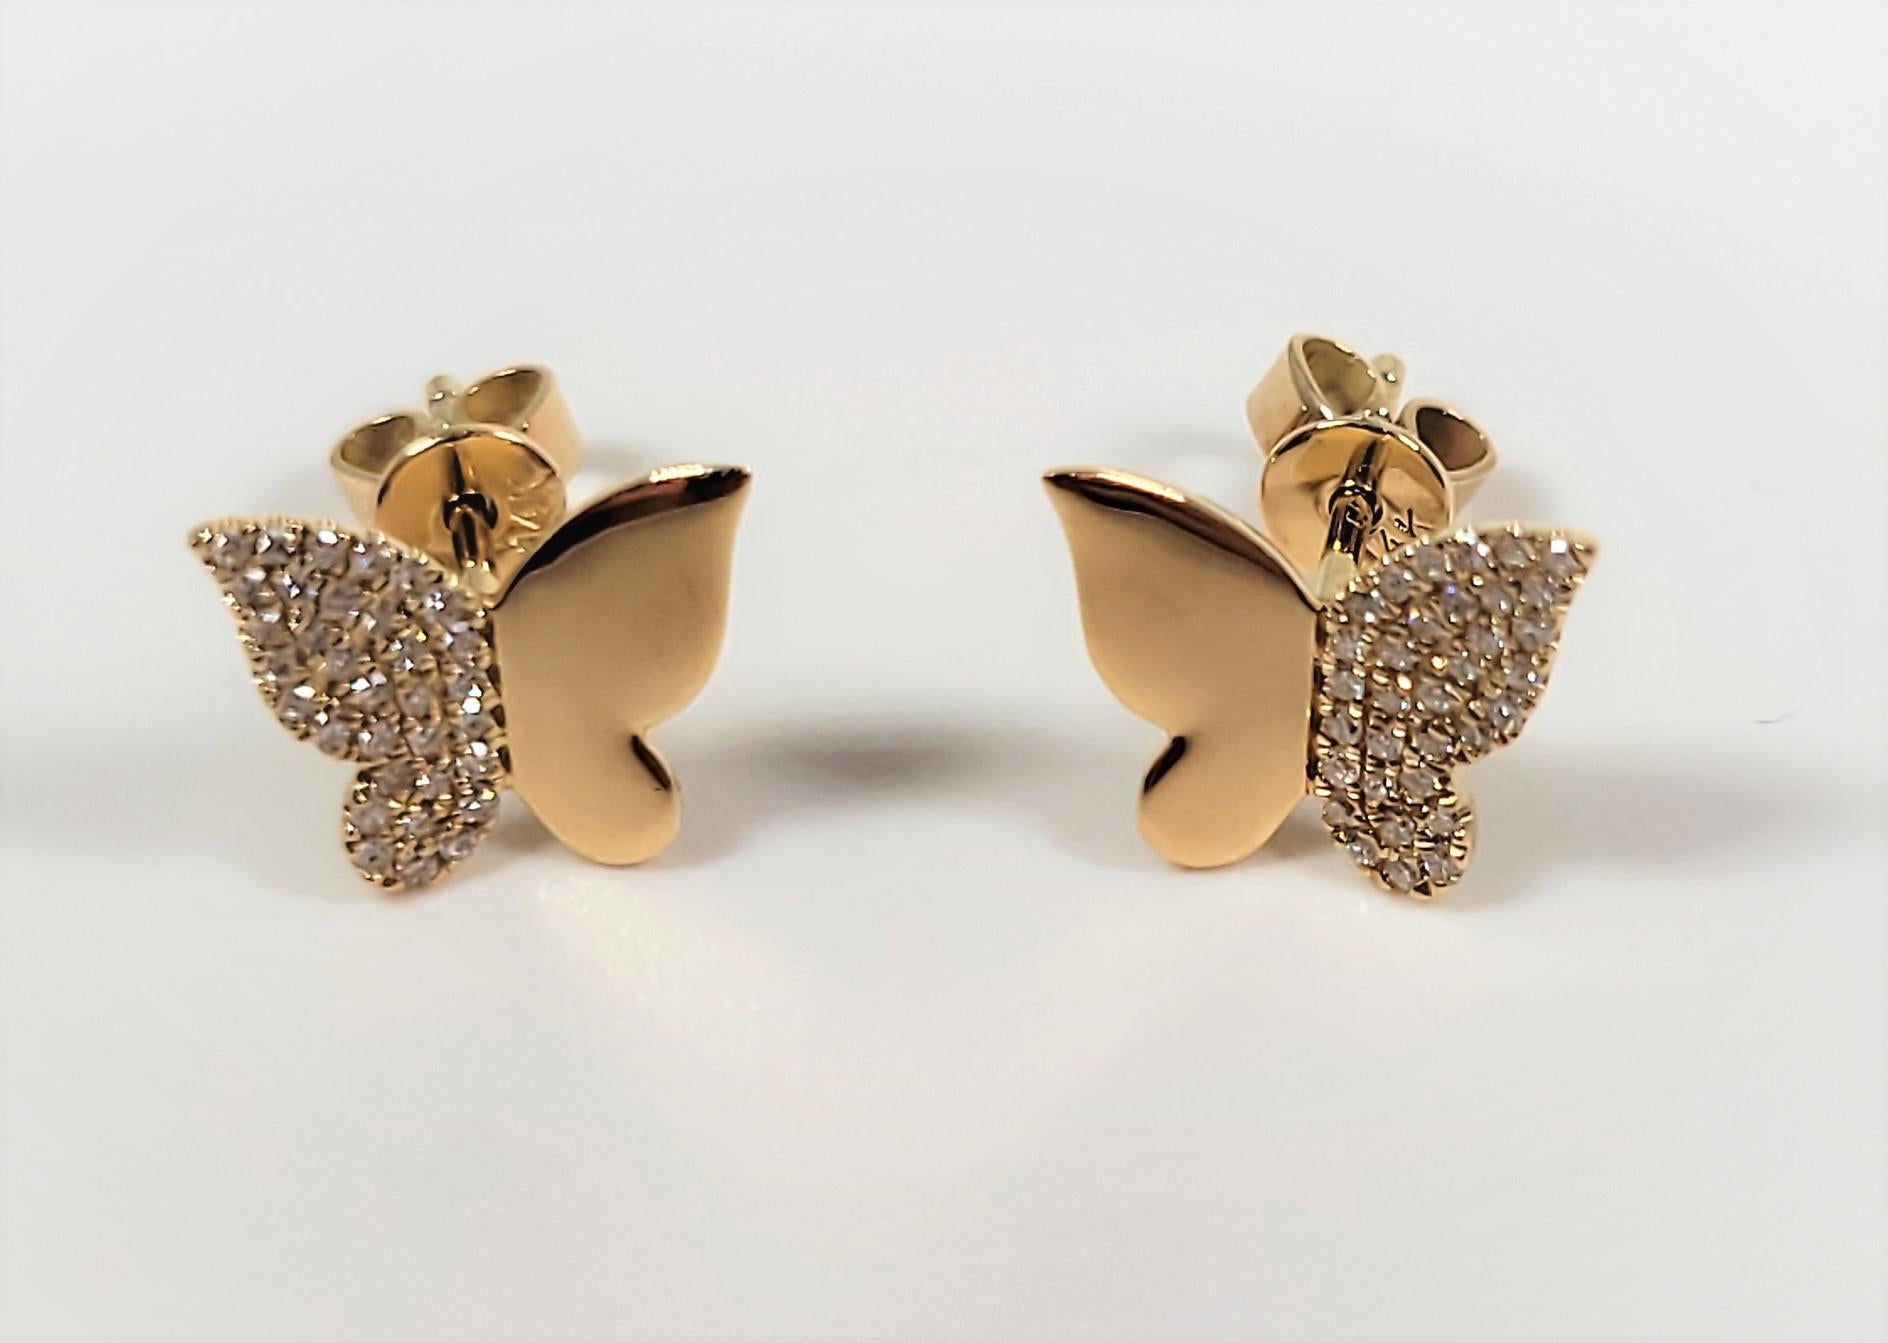 0.53 carats of diamonds just sparkle in these 14 karat, yellow gold, butterfly shaped earrings!!